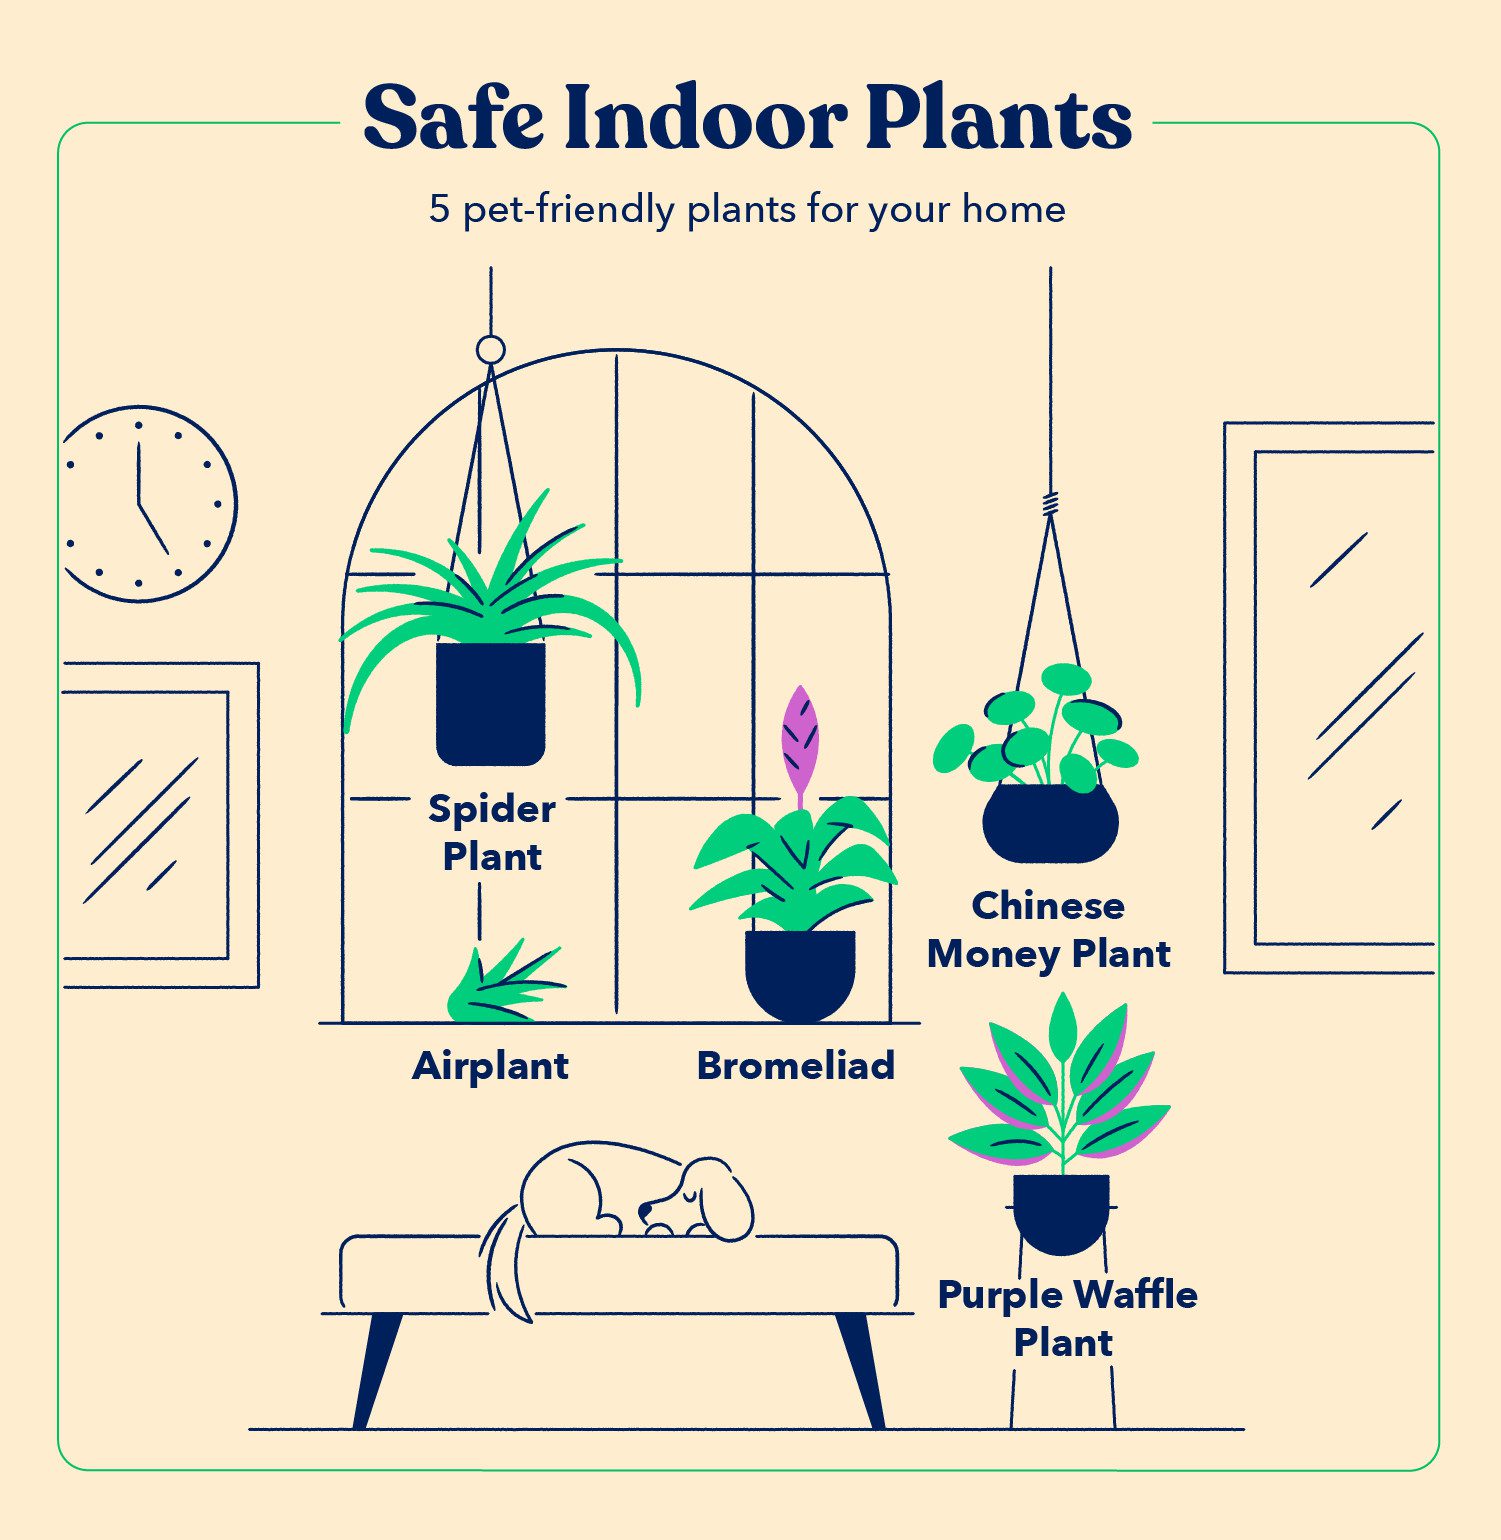 a dog lays on a bench indoors and is surrounded by pet-safe houseplants, including a Spider Plant, Airplant, Bromeliad, Purple Waffle Plant, and Chinese Money Plant